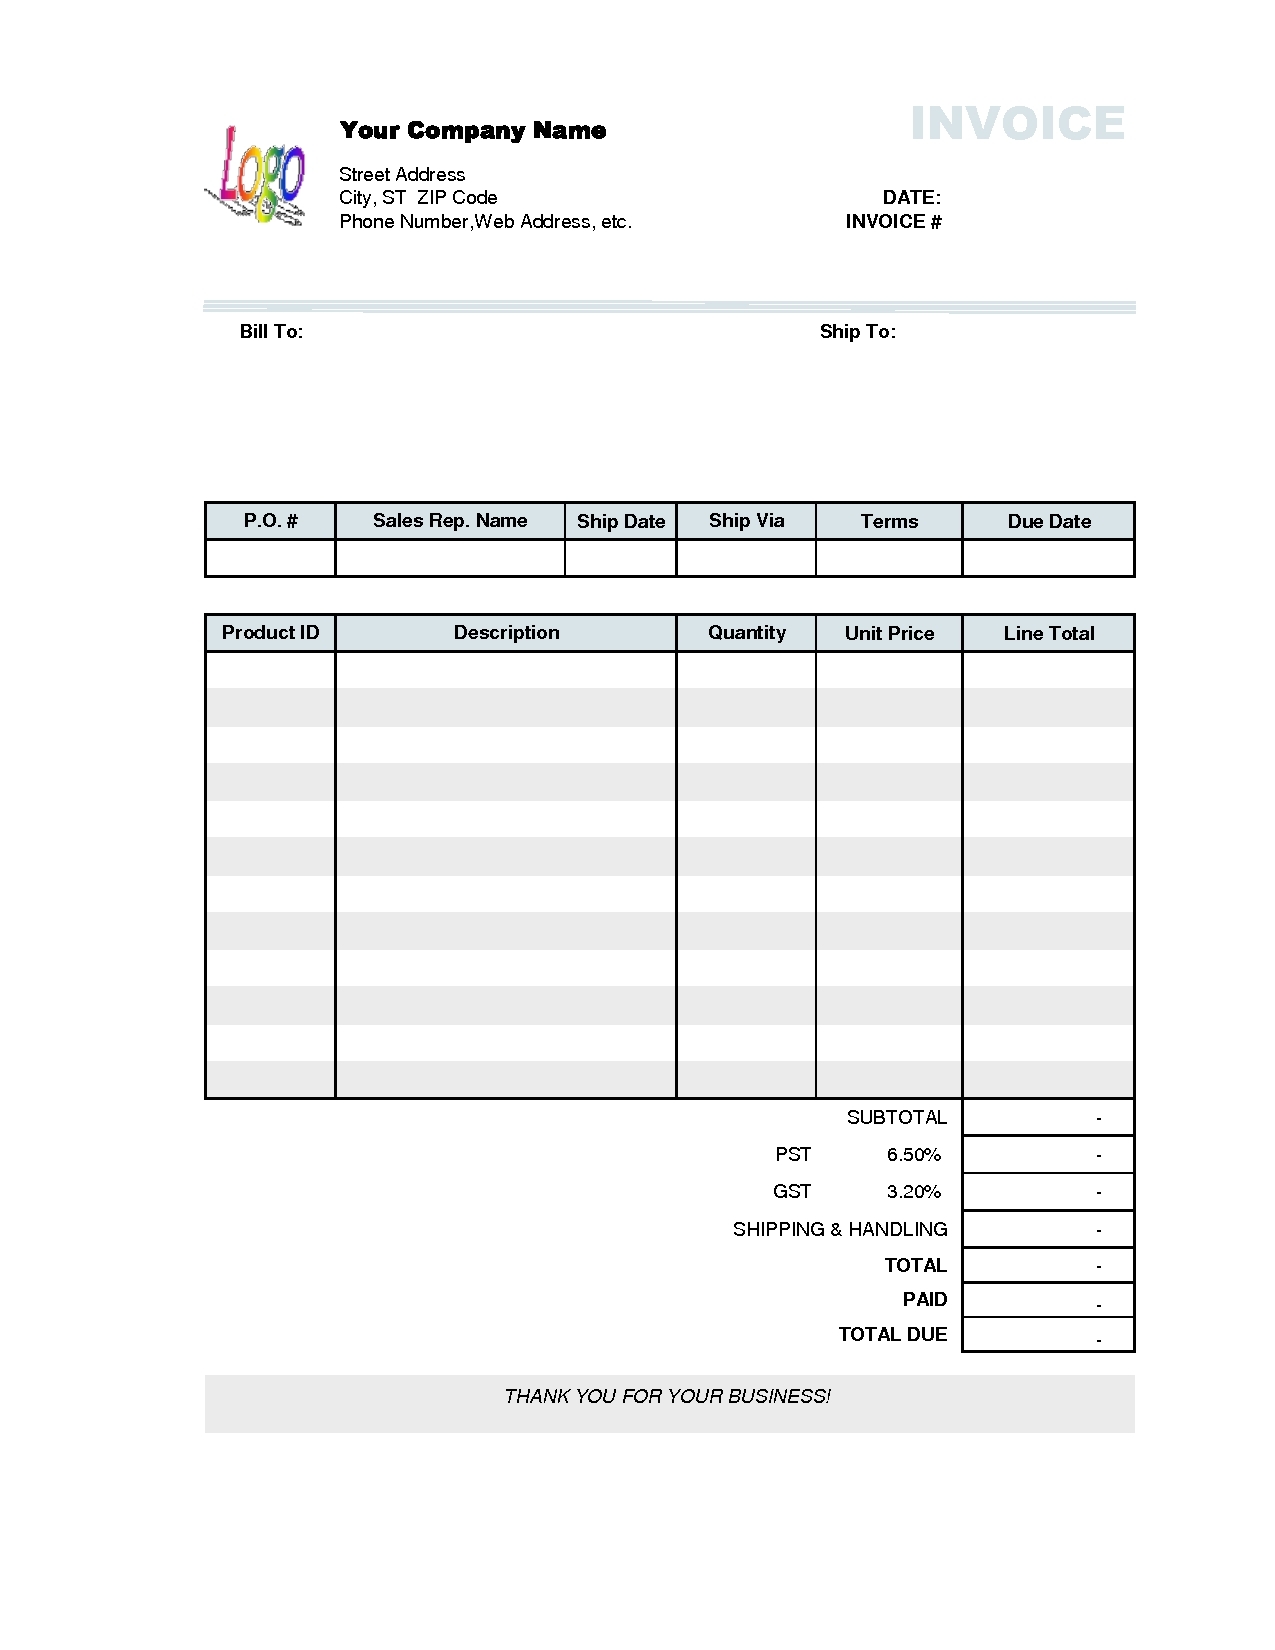 invoices for small business invoice template free 2016 invoices for business